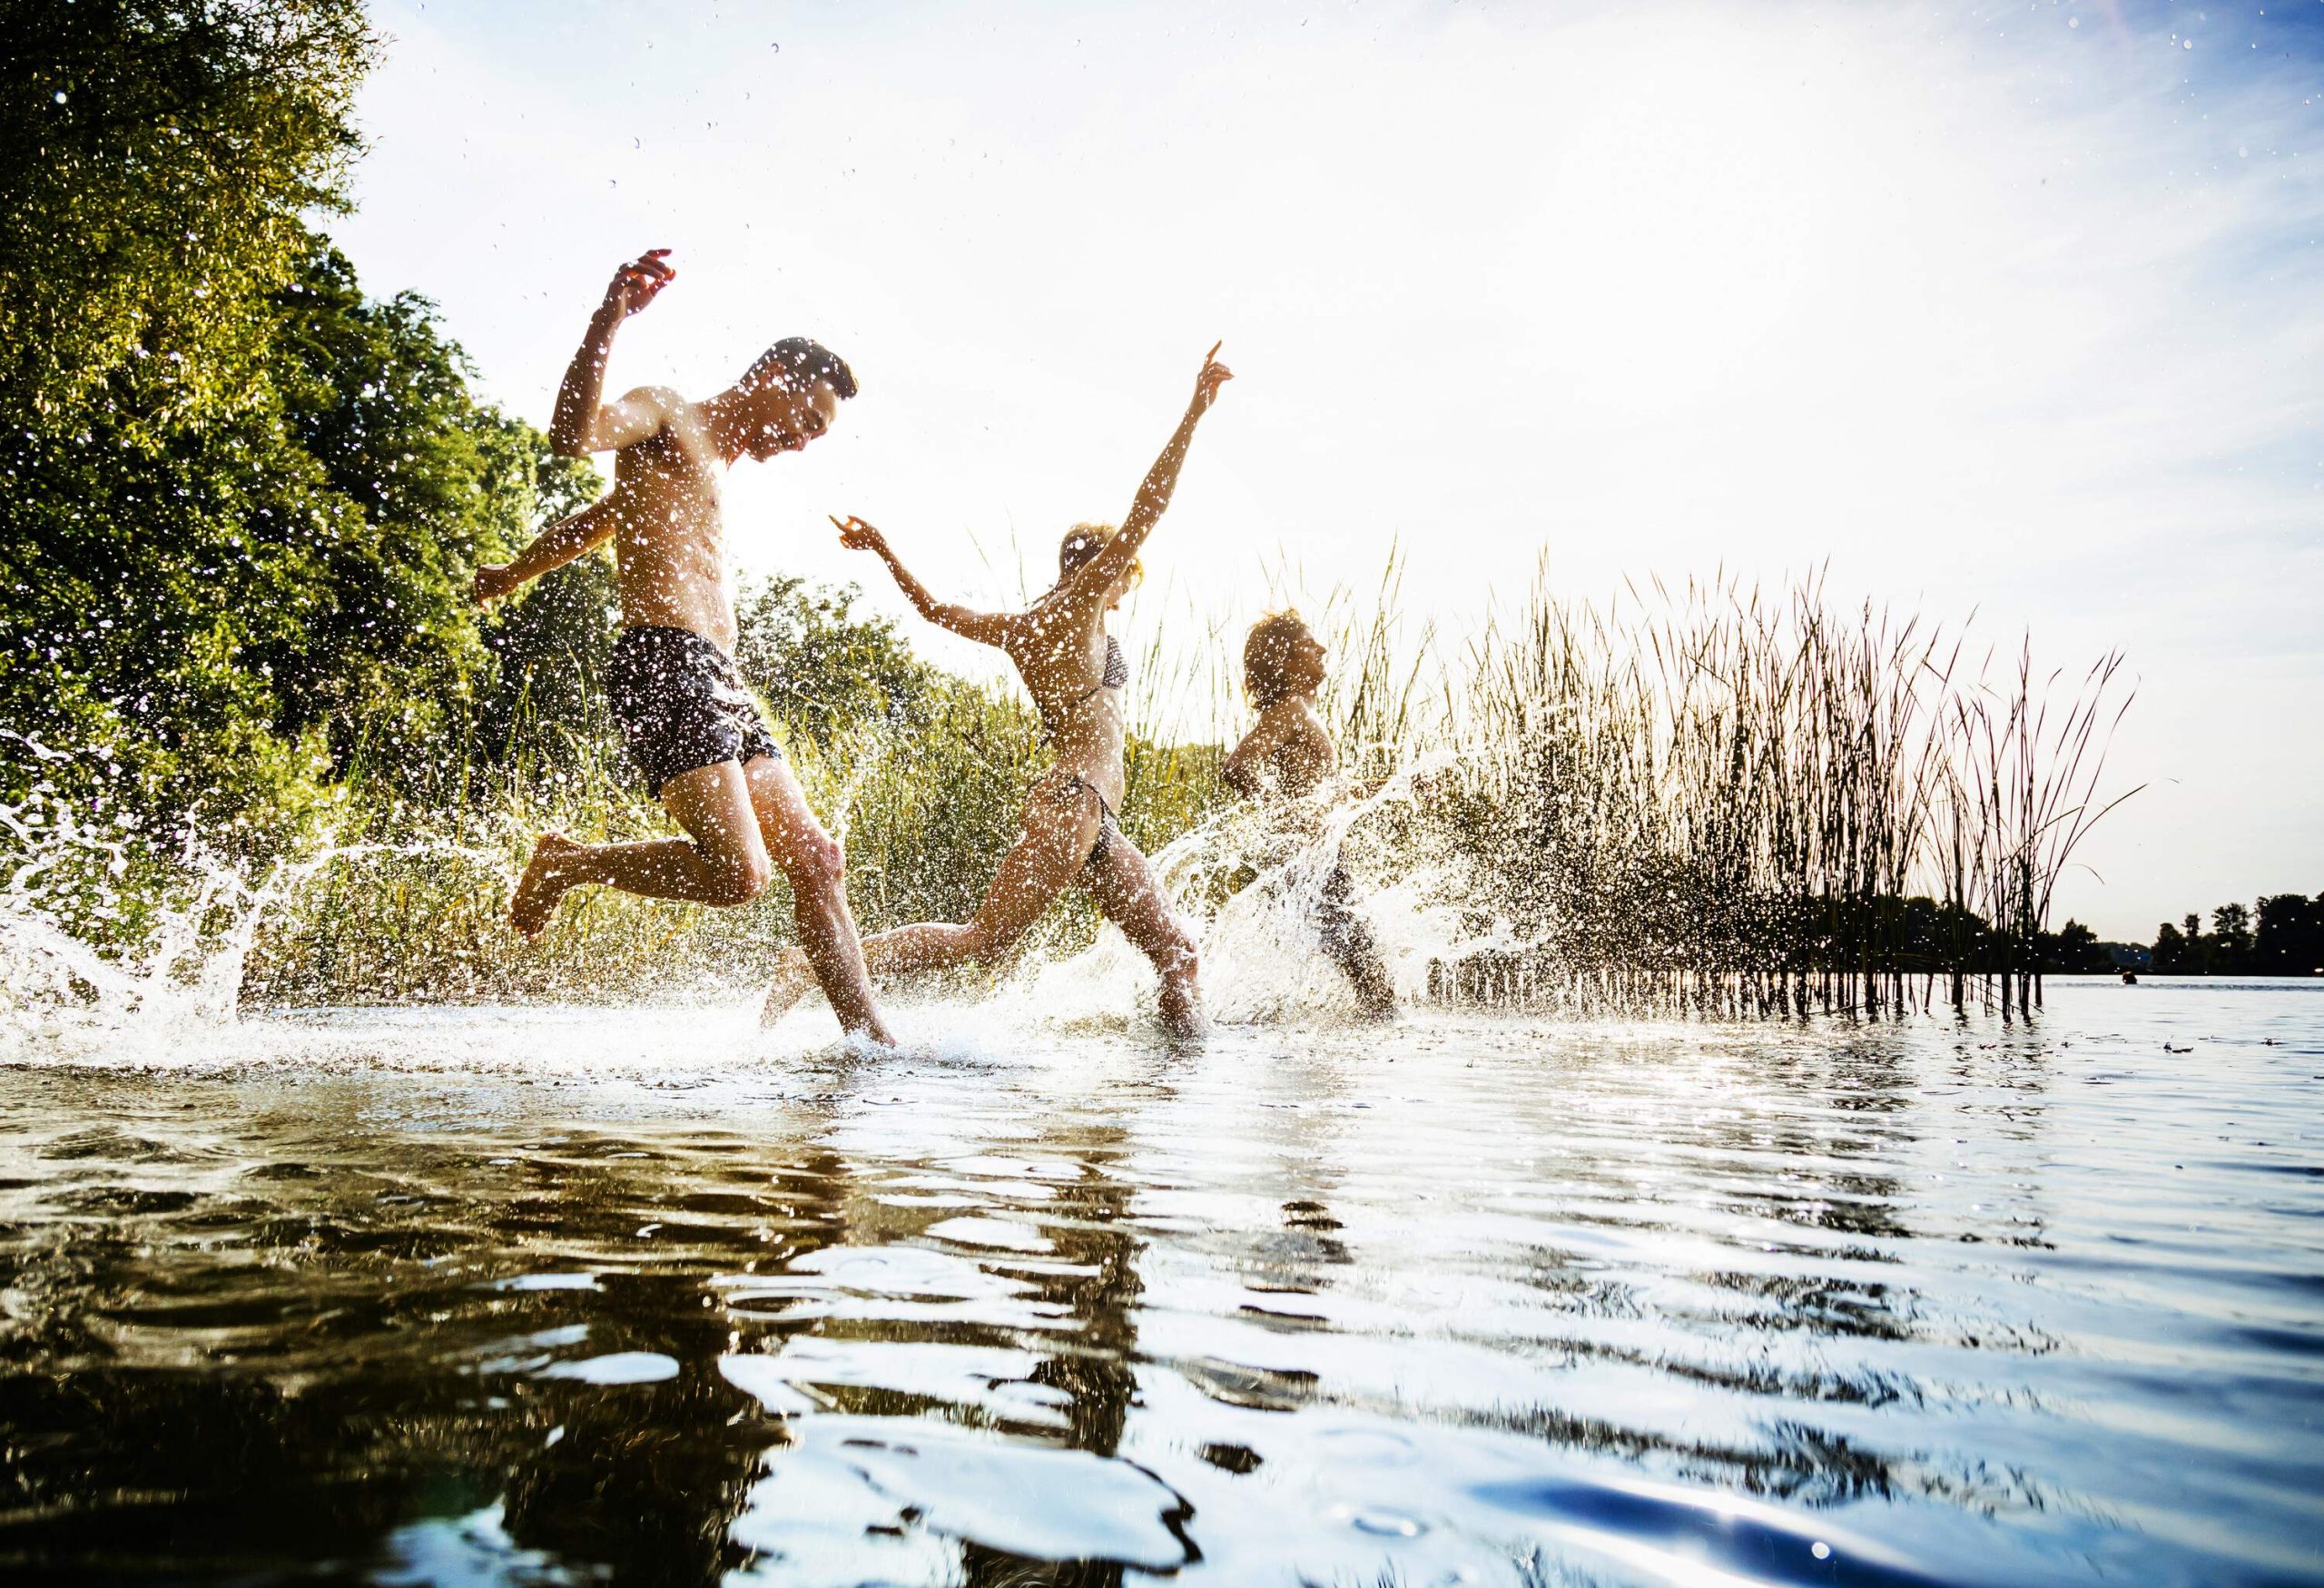 Three friends jumping into a lake and making water splashes as they go.